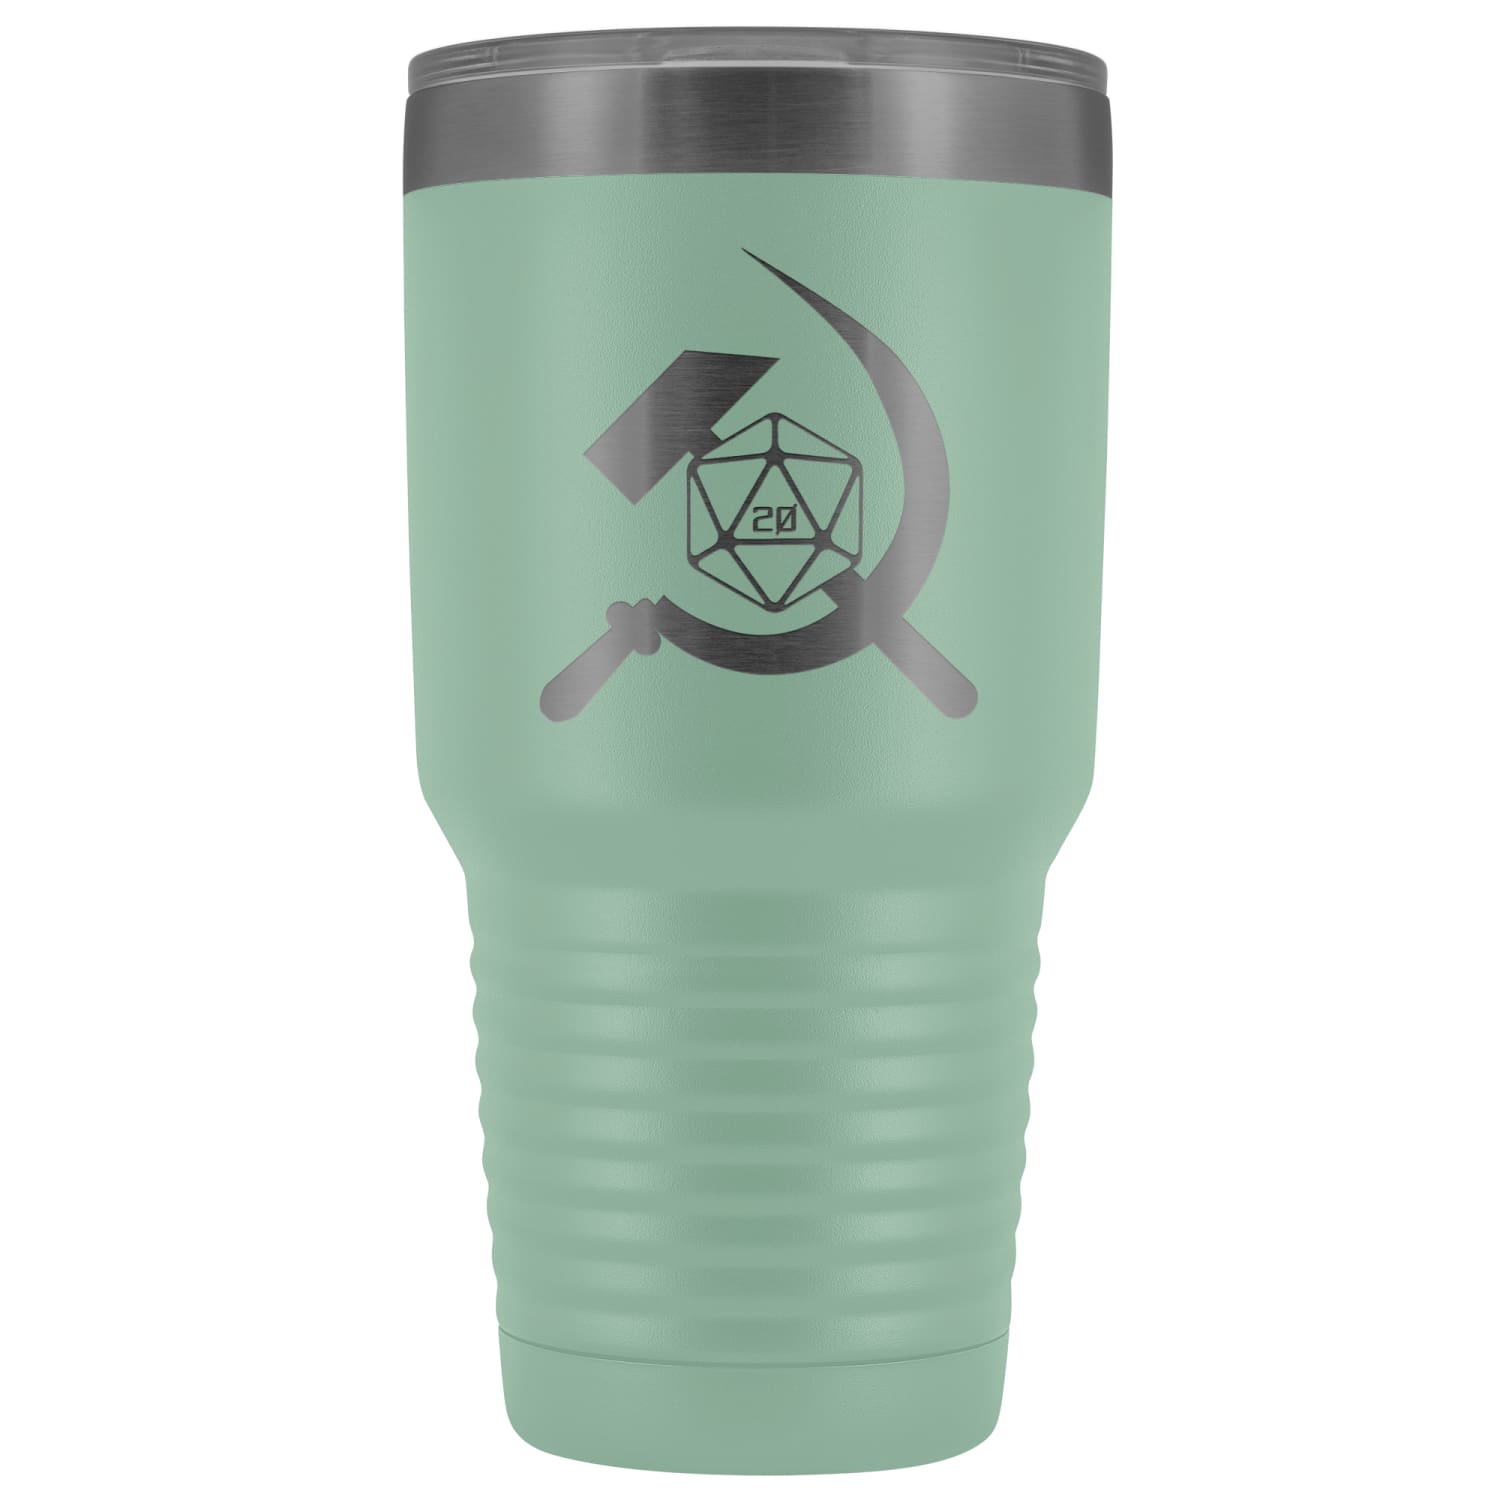 NOT FOR SALE - Commission Alex - Teal - Tumblers